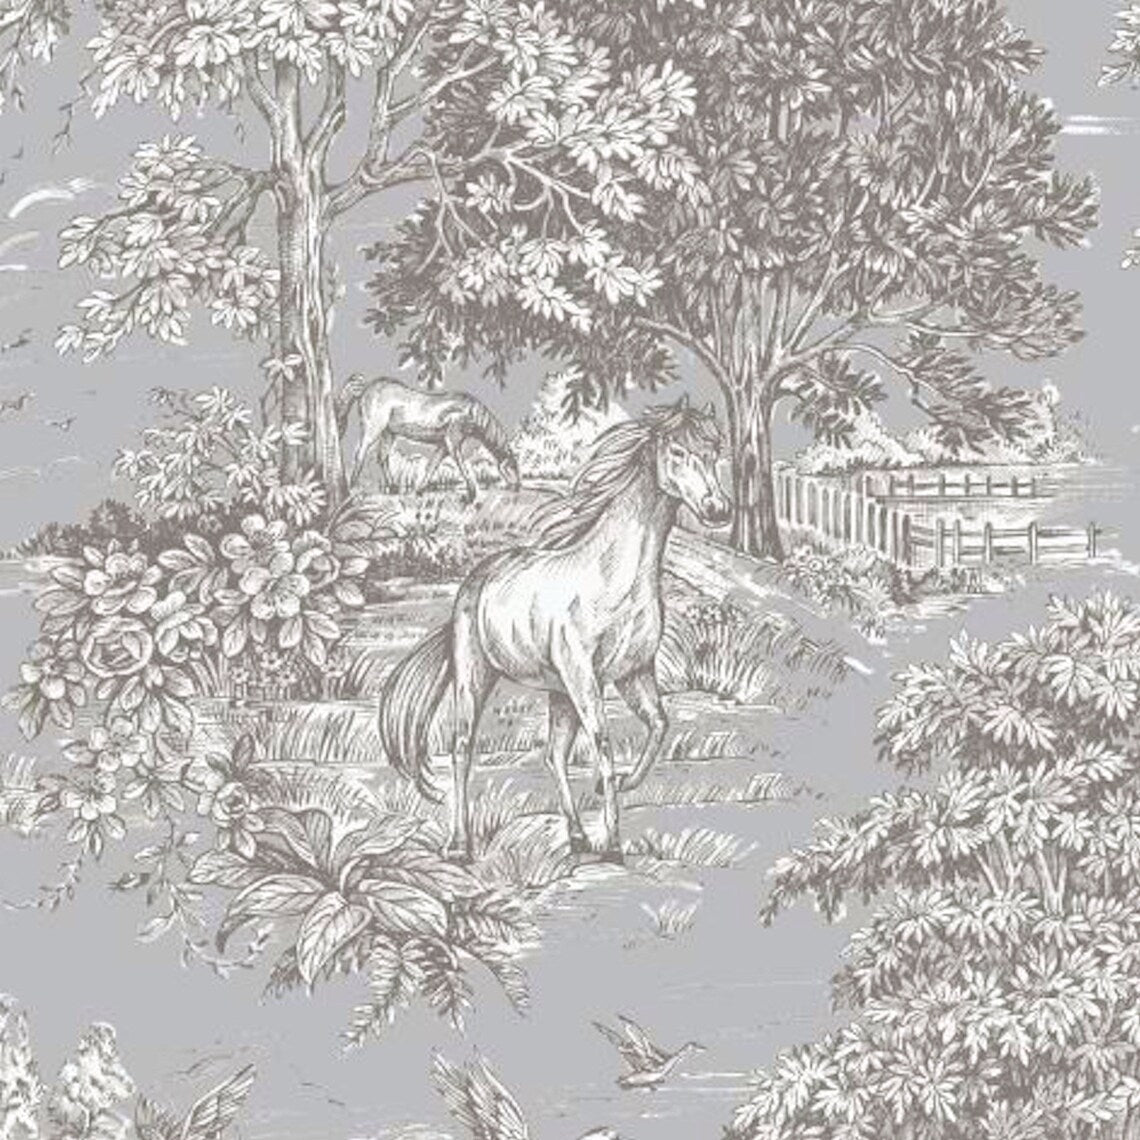 pillow sham in Yellowstone Dove Blue Gray Country Toile- Horses, Deer, Dogs- Large Scale